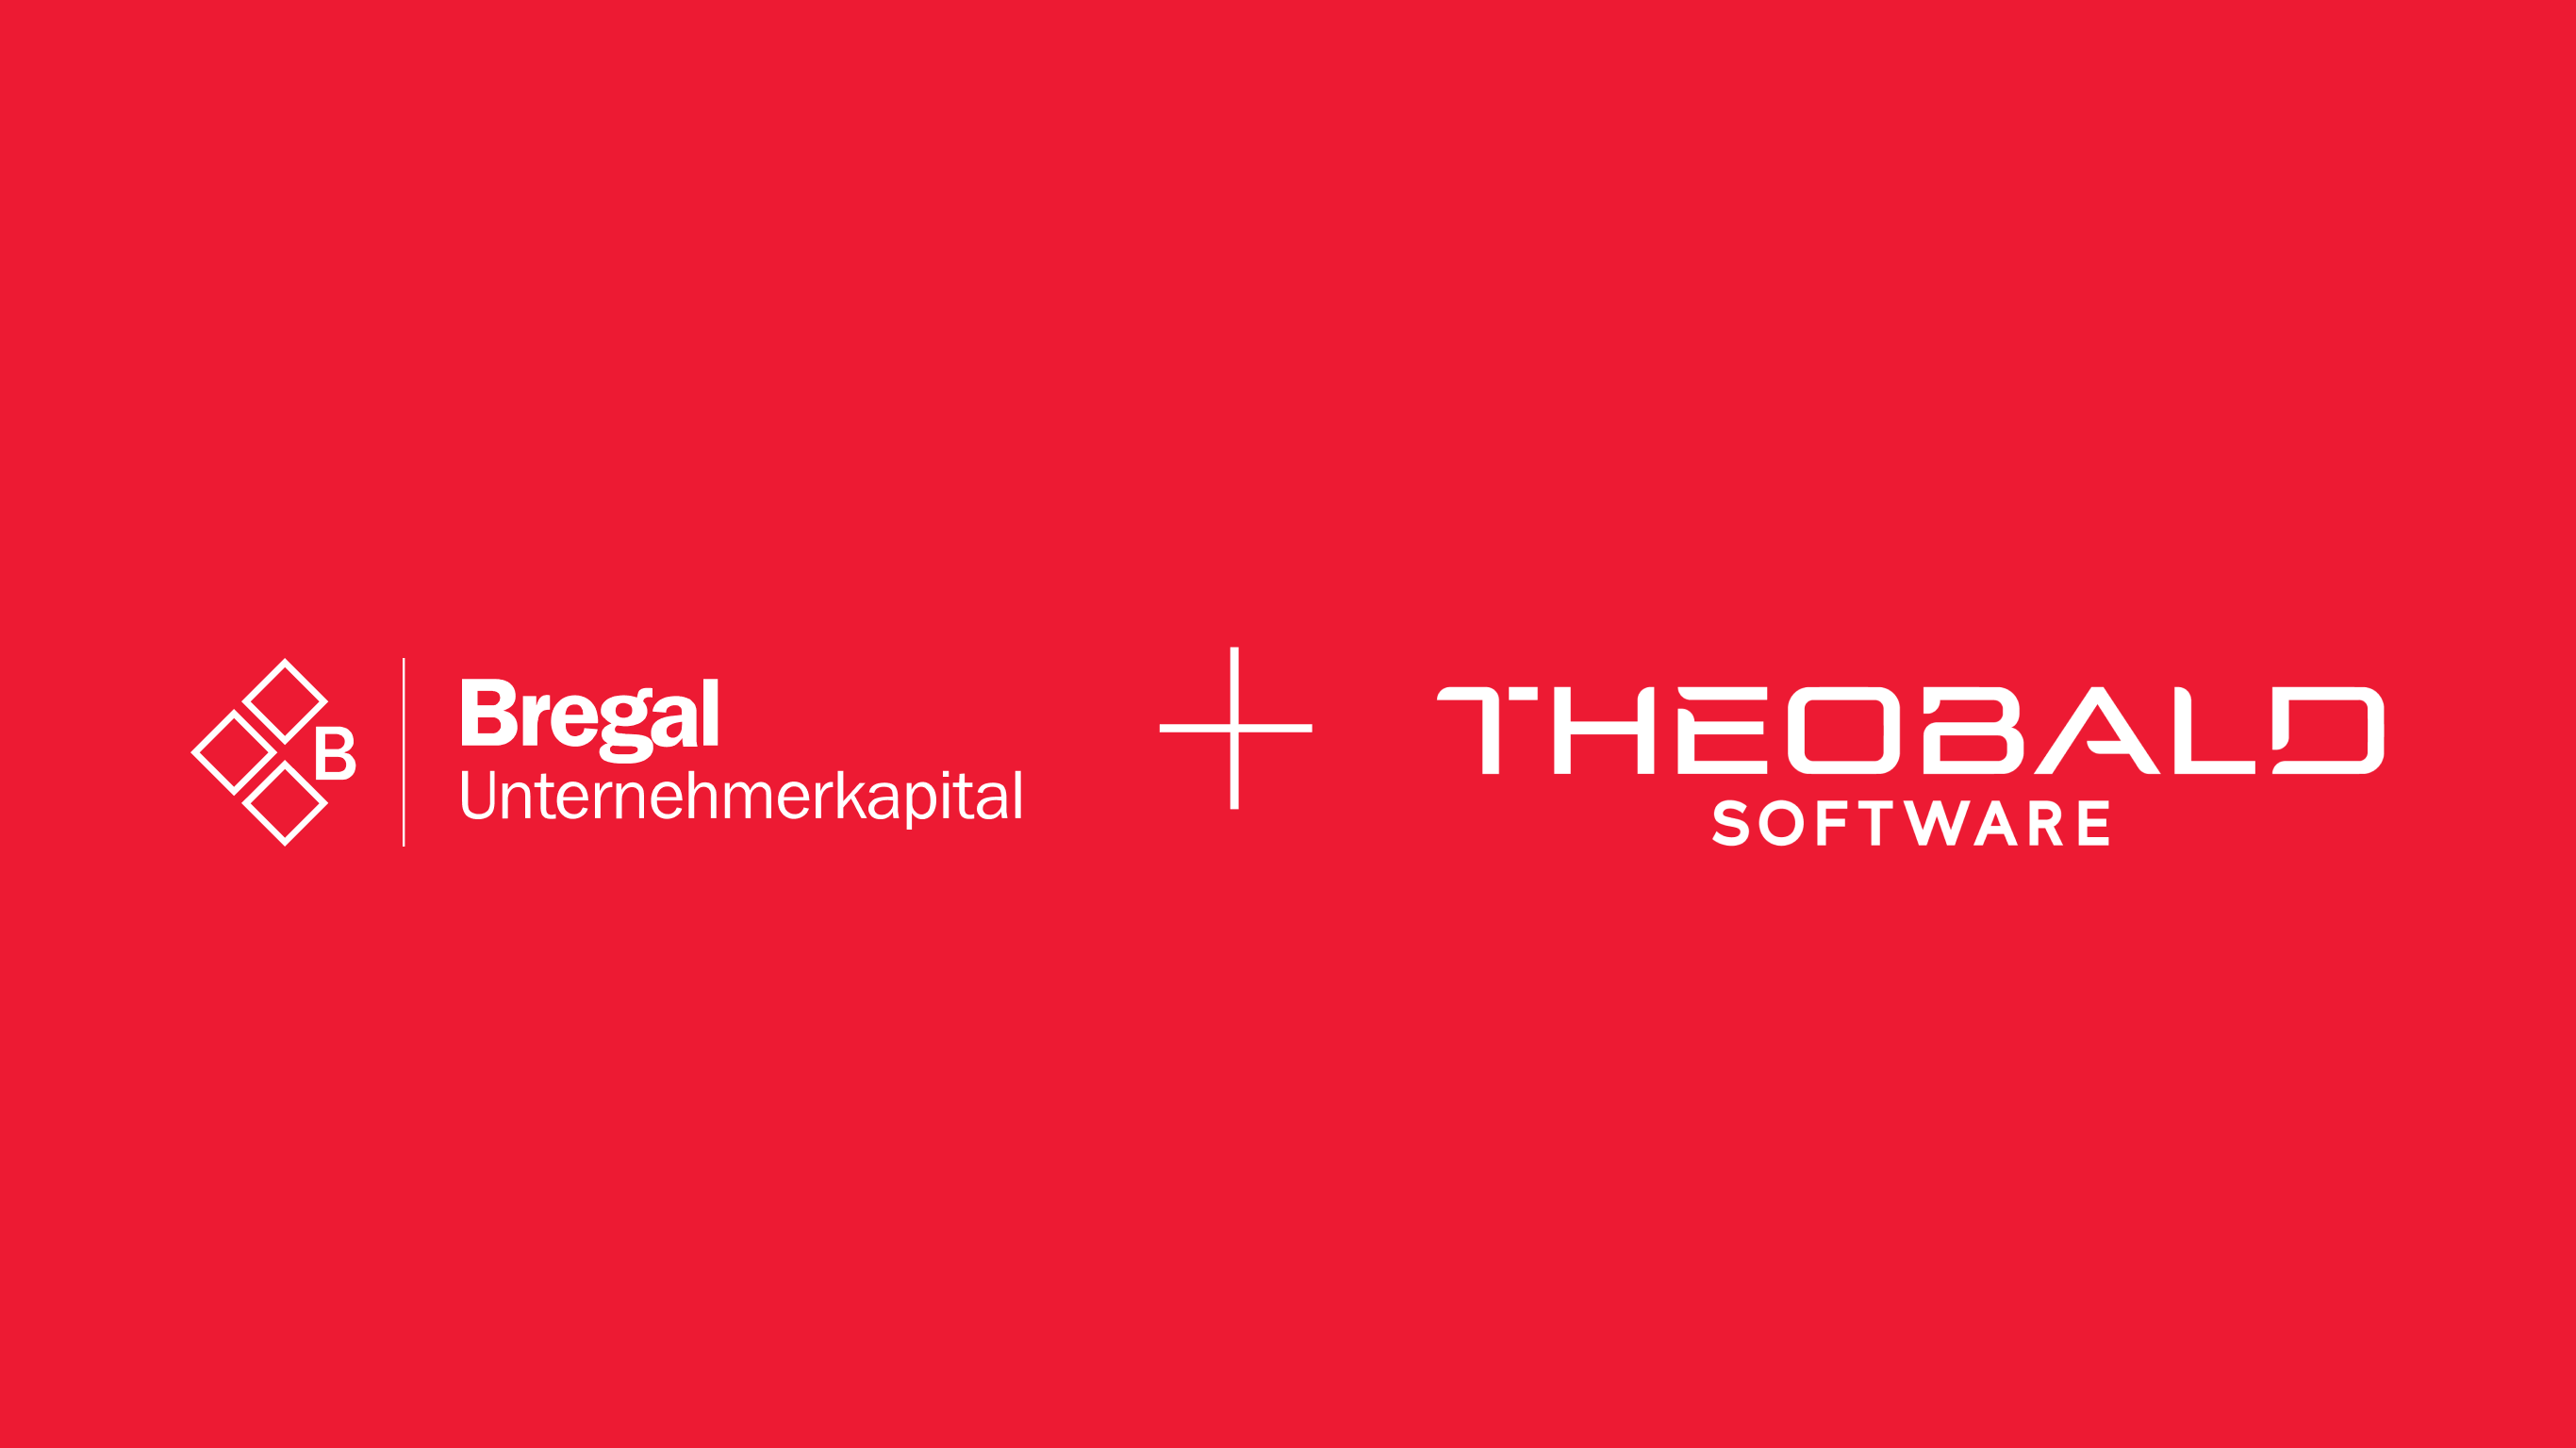 Tech & Product DD | Acquisition | Code & Co. advises Bregal Unternehmerkapital on Theobald Software